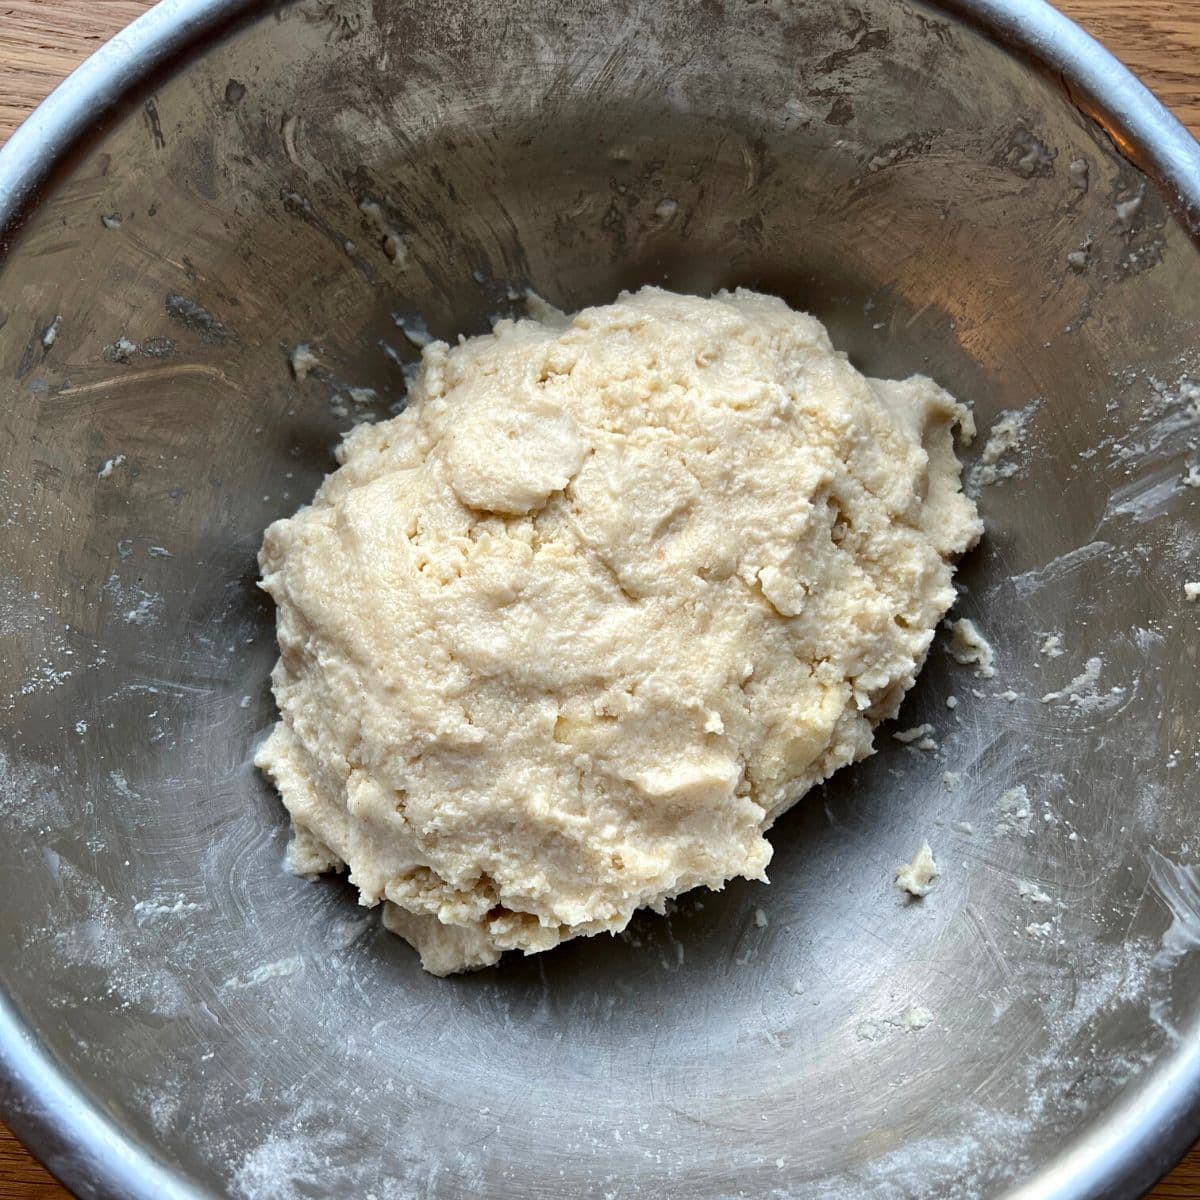 Biscuit dough in mixing bowl.